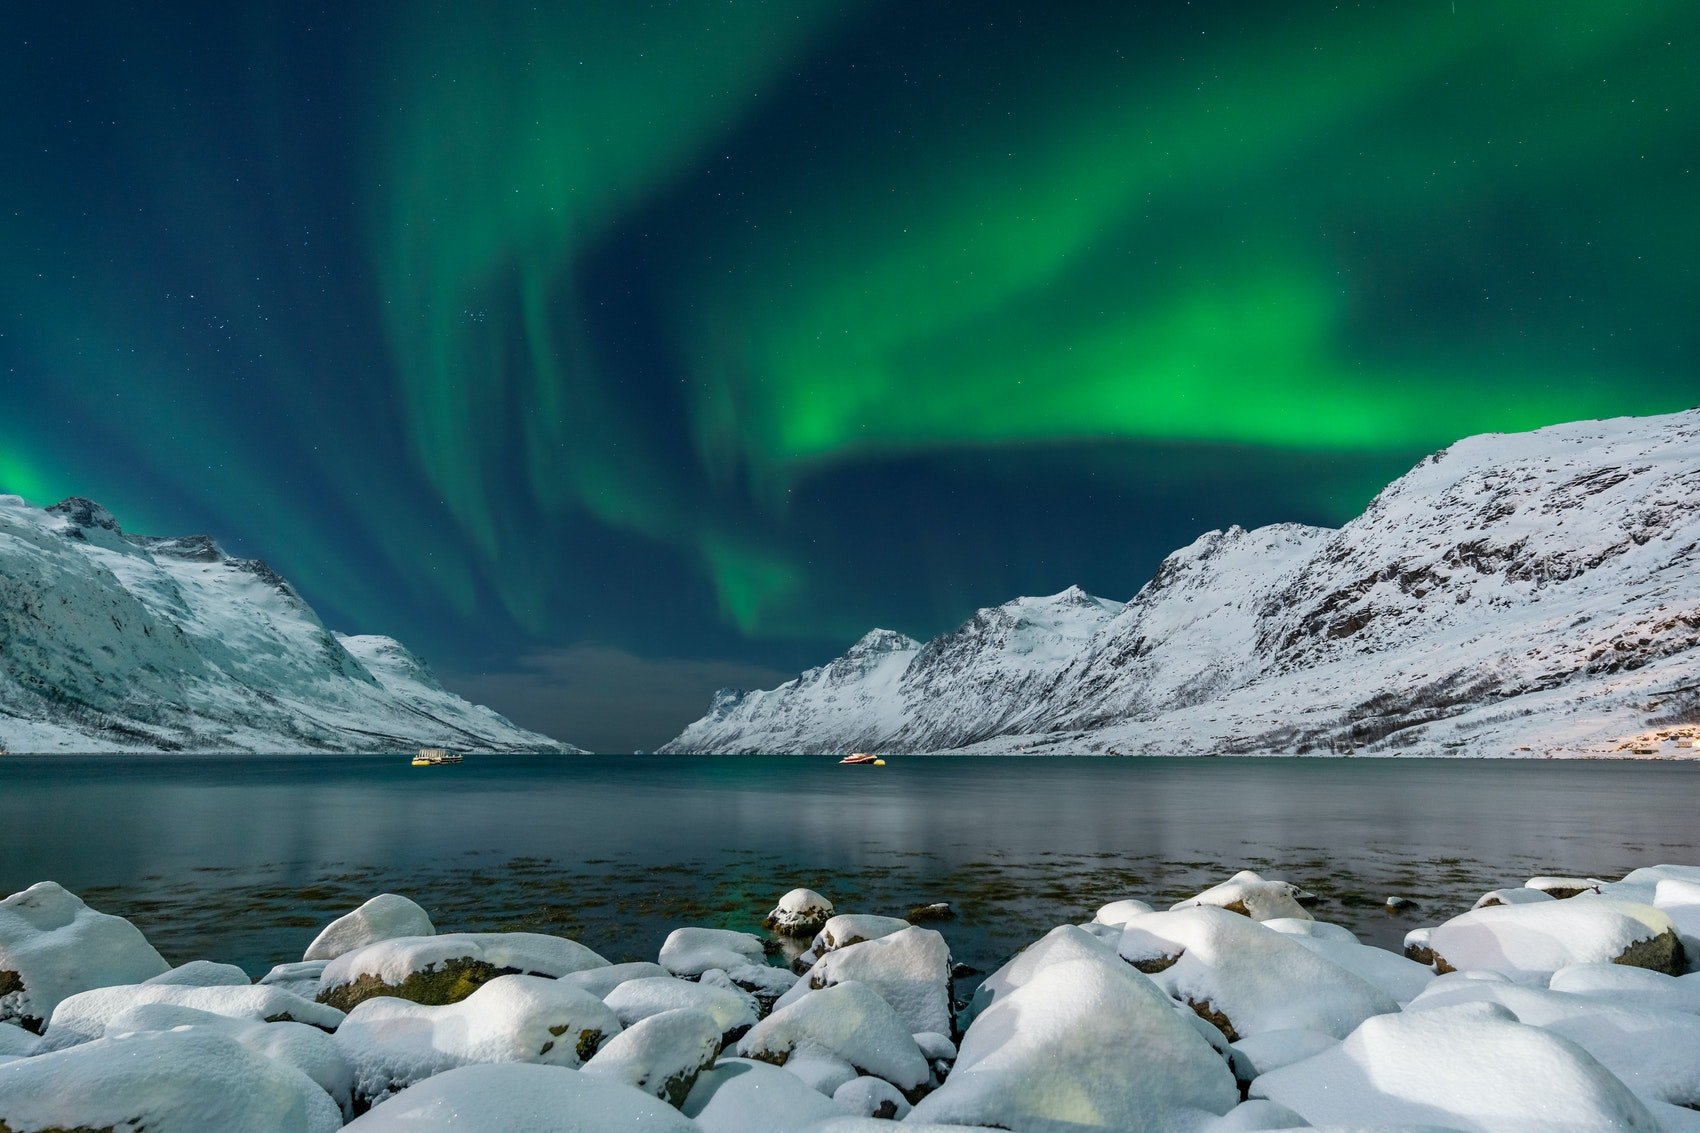 'Ersfjorden Northern Lights' (photograph) by Lachlan Garutti. Photographic print of a photograph of the northern lights above water in Norway. Art